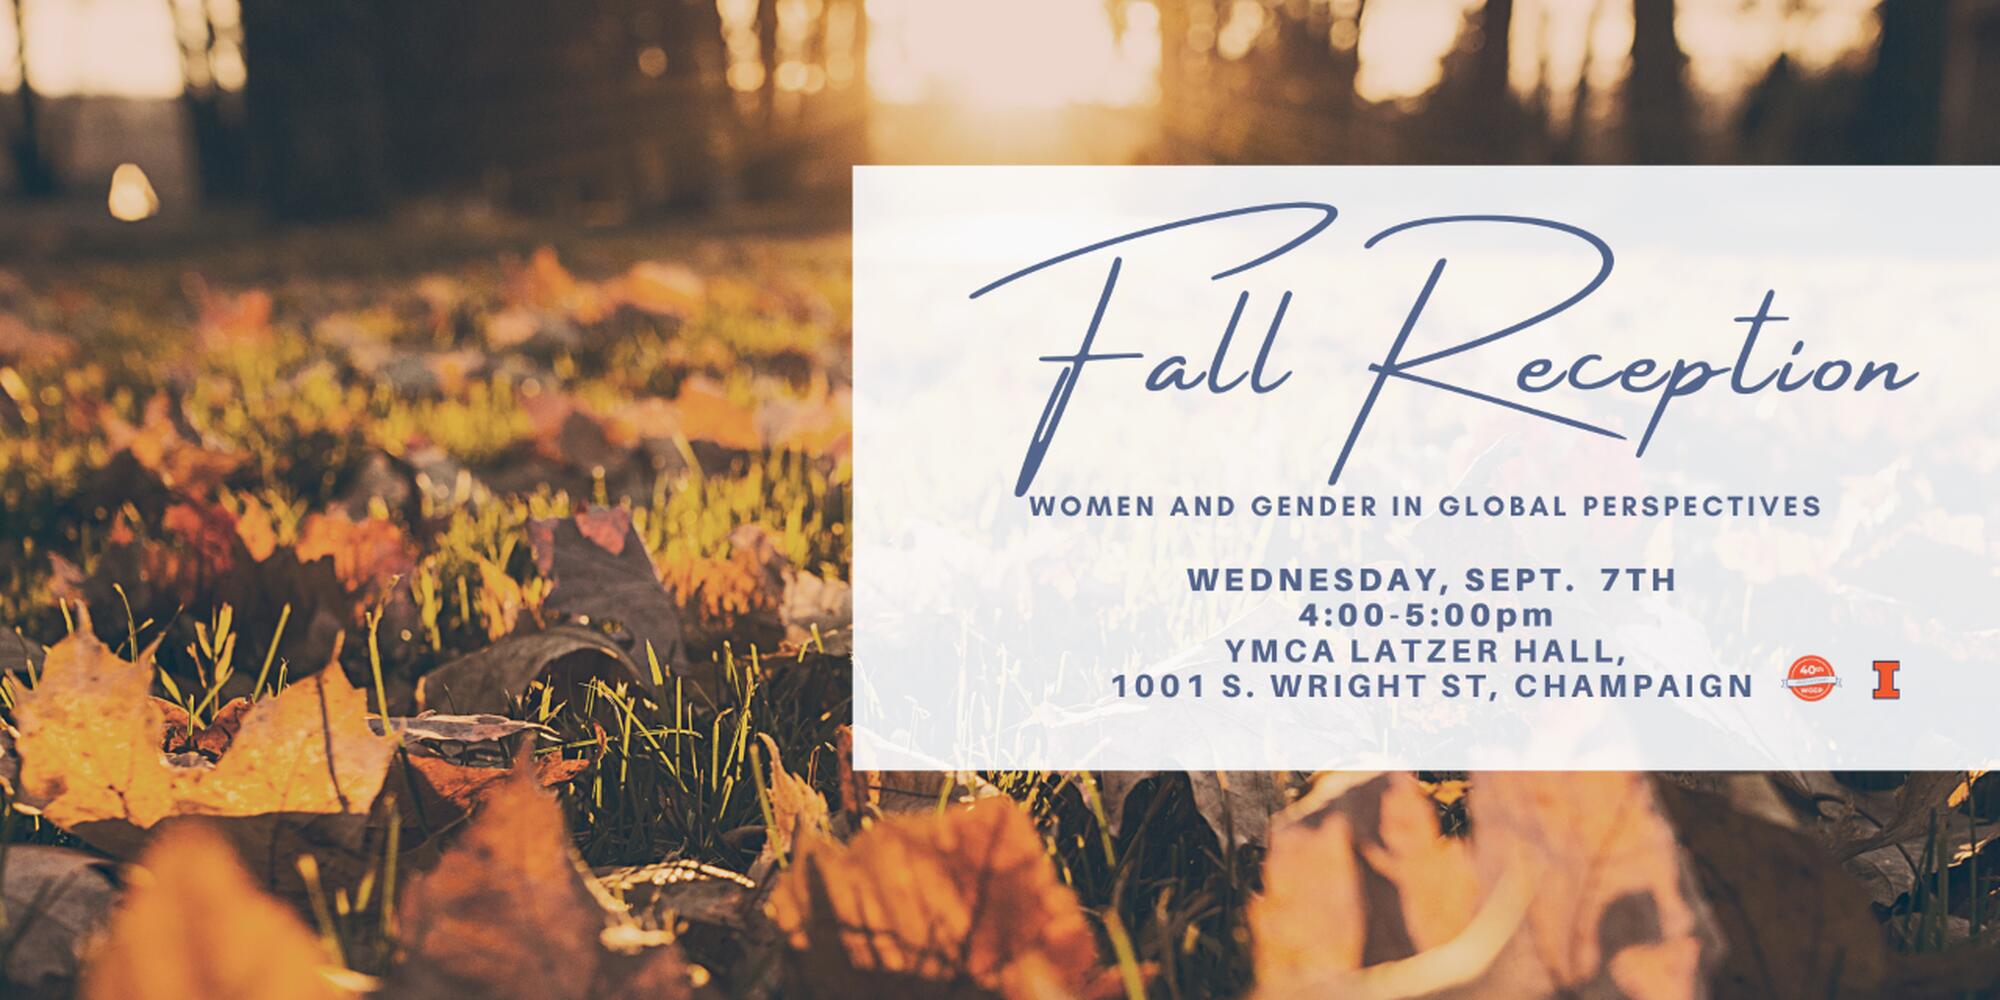 Fall Reception event poster with details